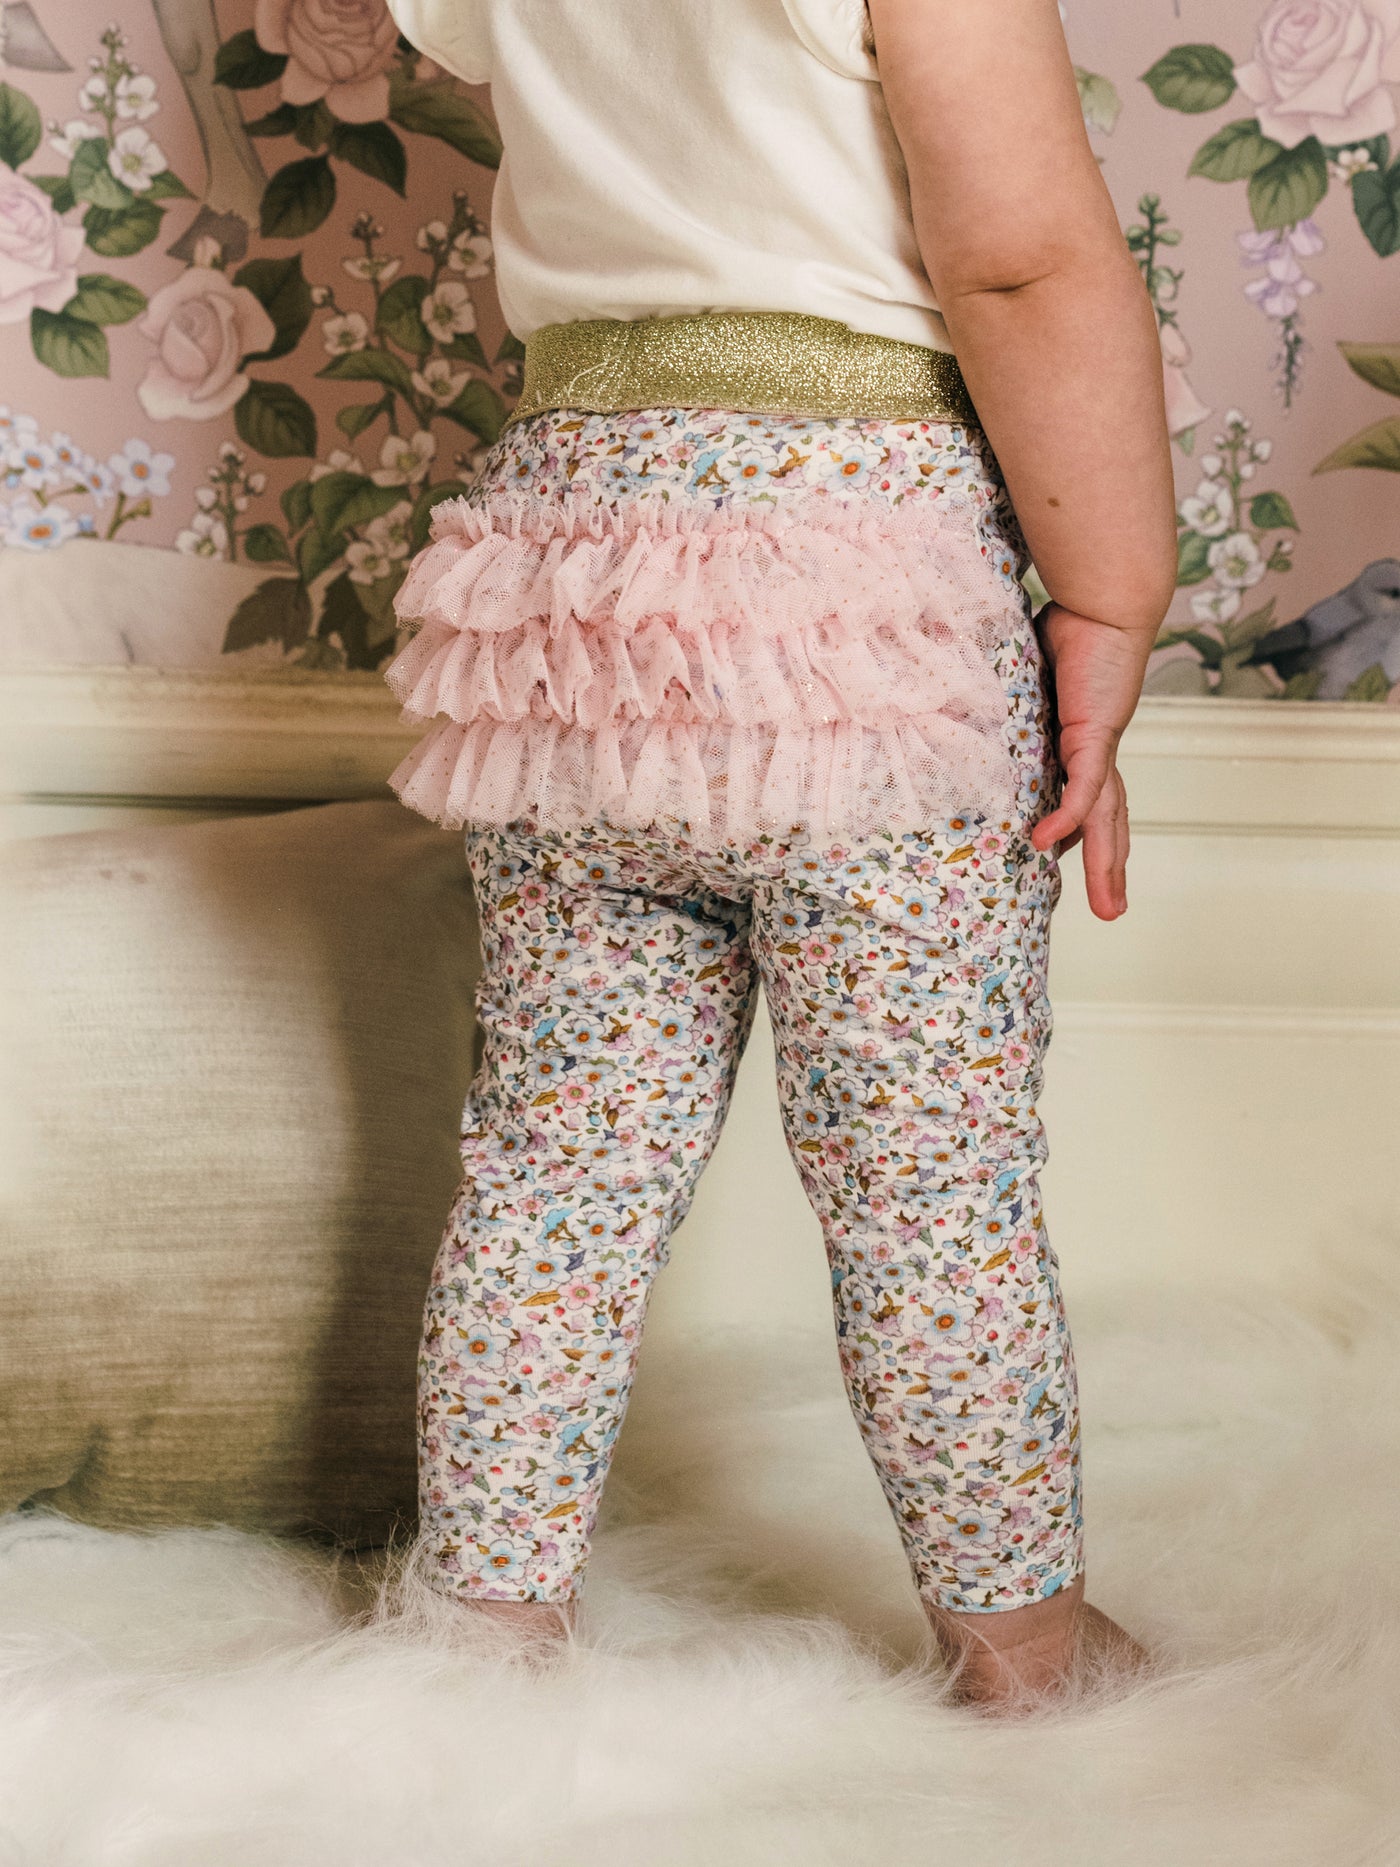 'Forget-me-nots' Fabulous Frilled Legging - Snow